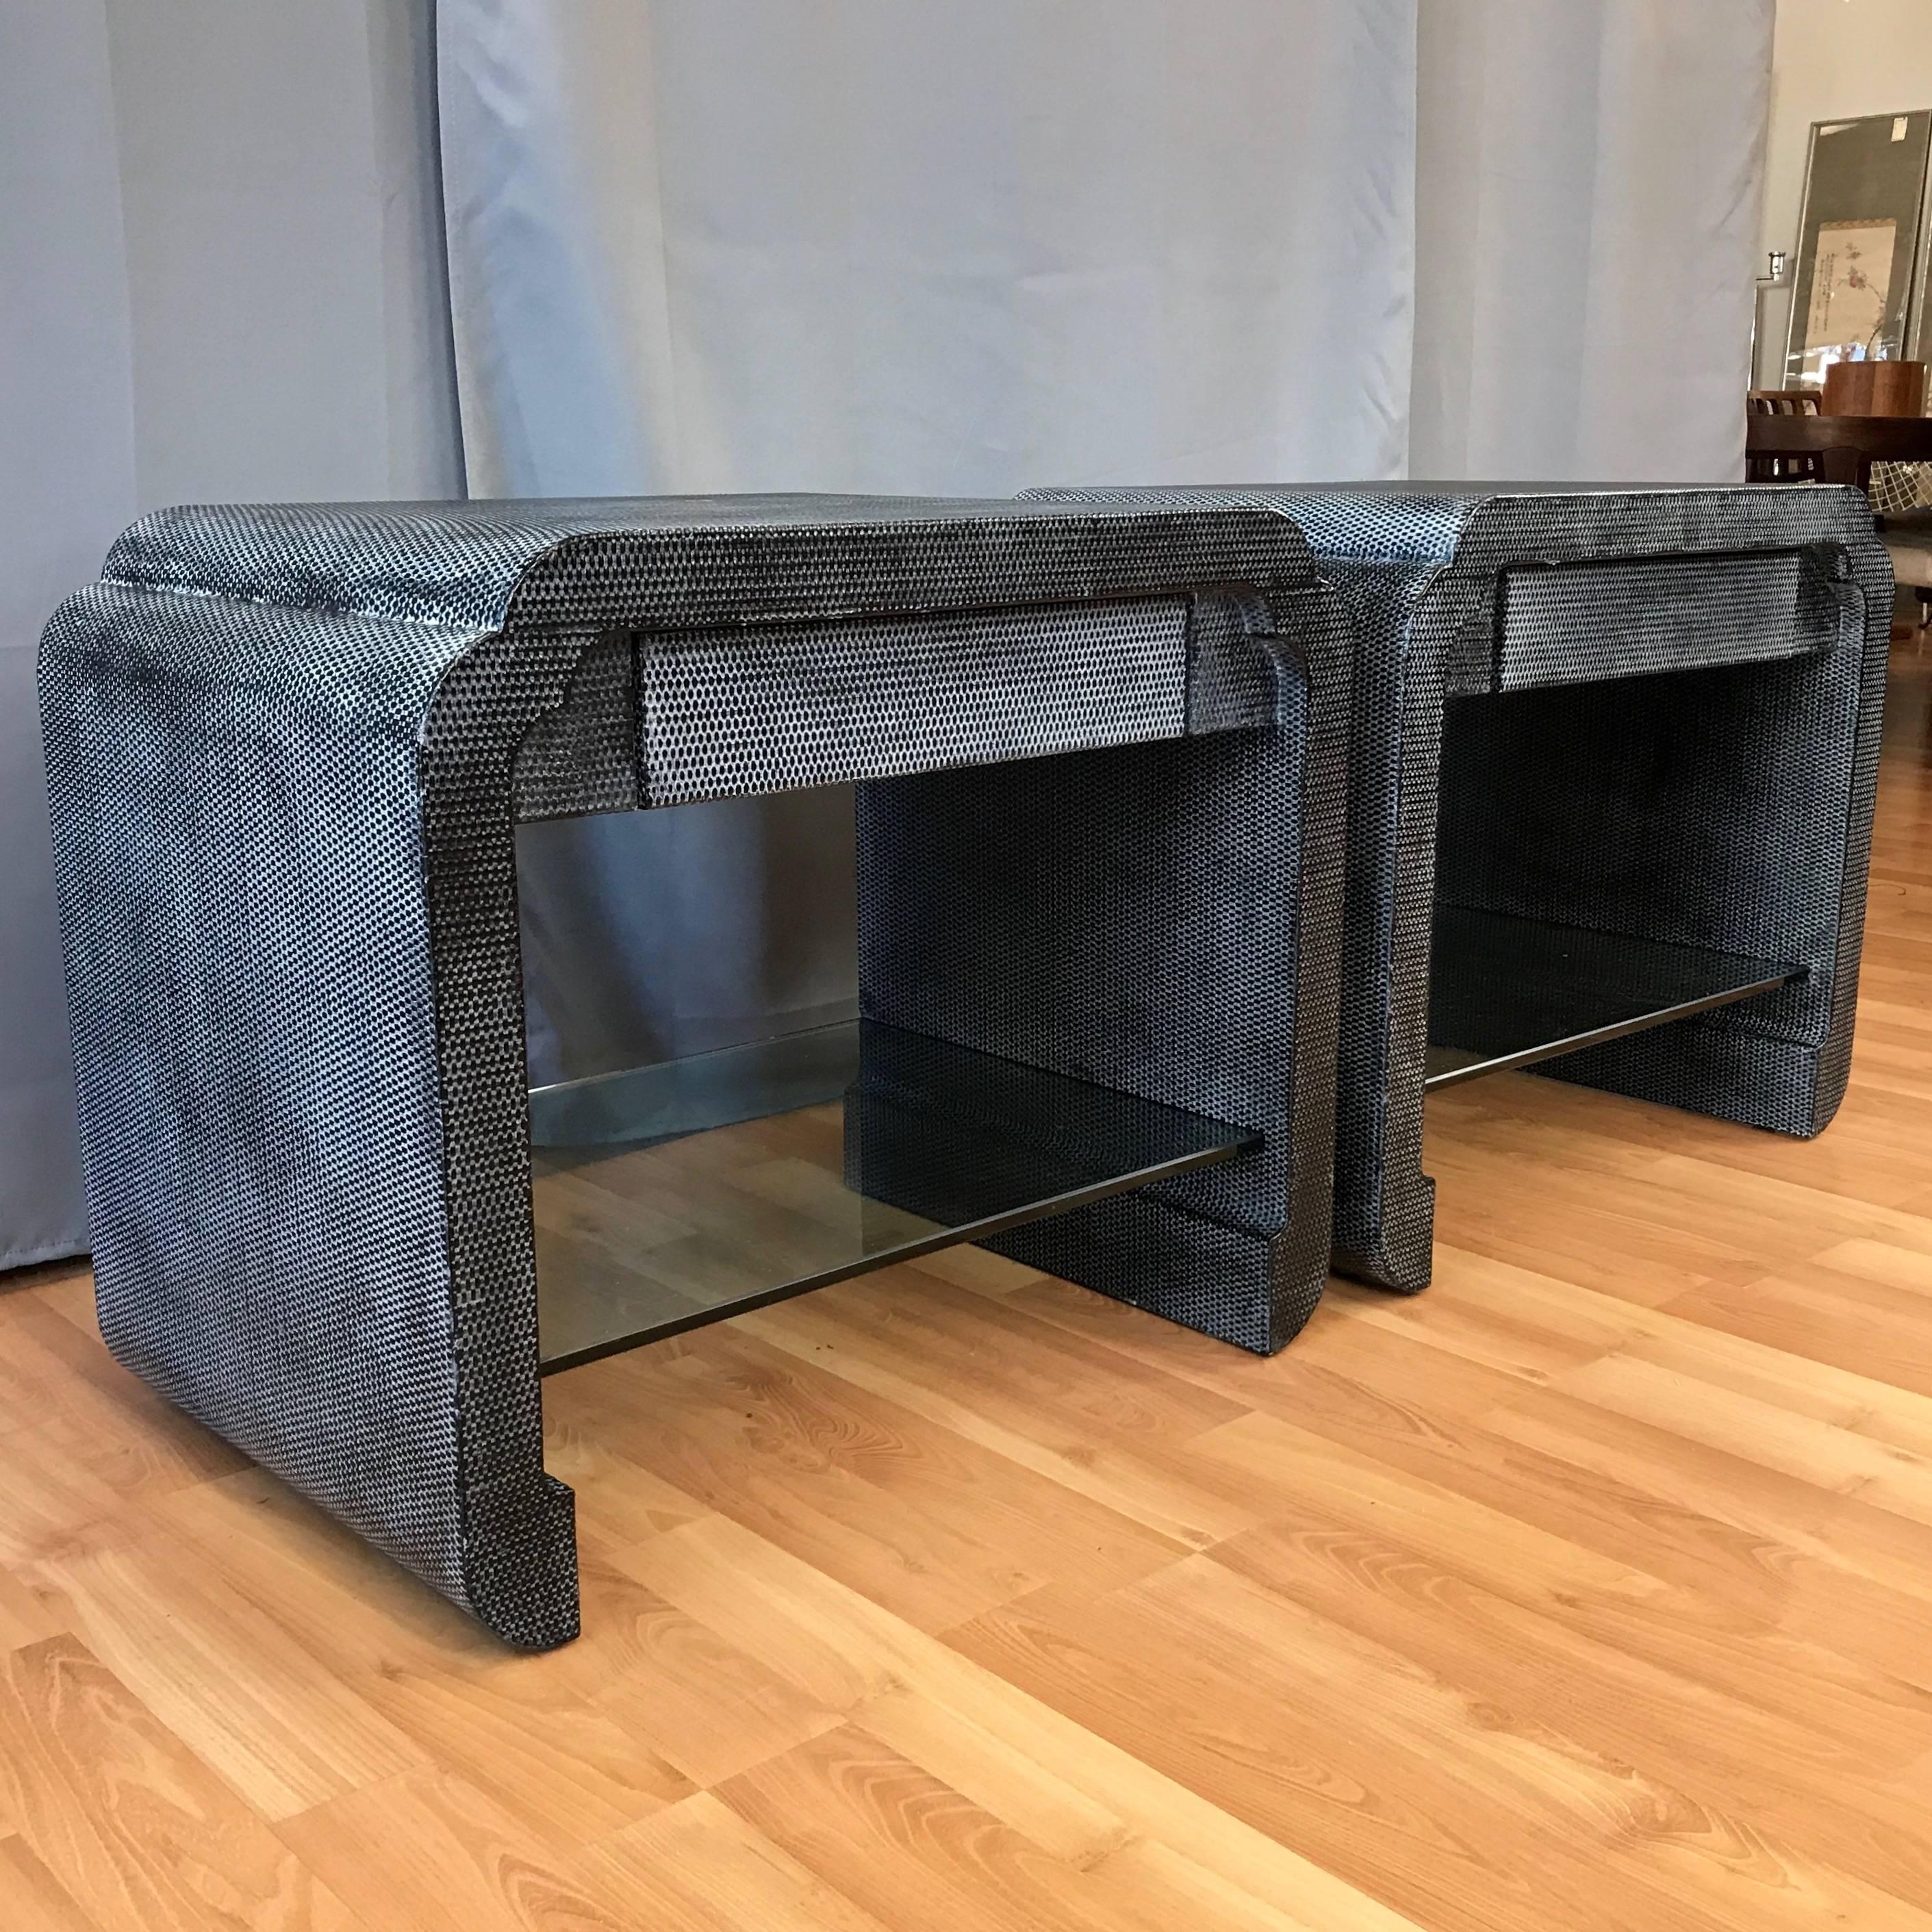 A fantastic pair of uncommon lacquered raffia-clad end tables or nightstands by Harrison-Van Horn.

Fully finished in semi-gloss black lacquered raffia with a white wash that gives them a carbon fiber-like appearance, with a shifting